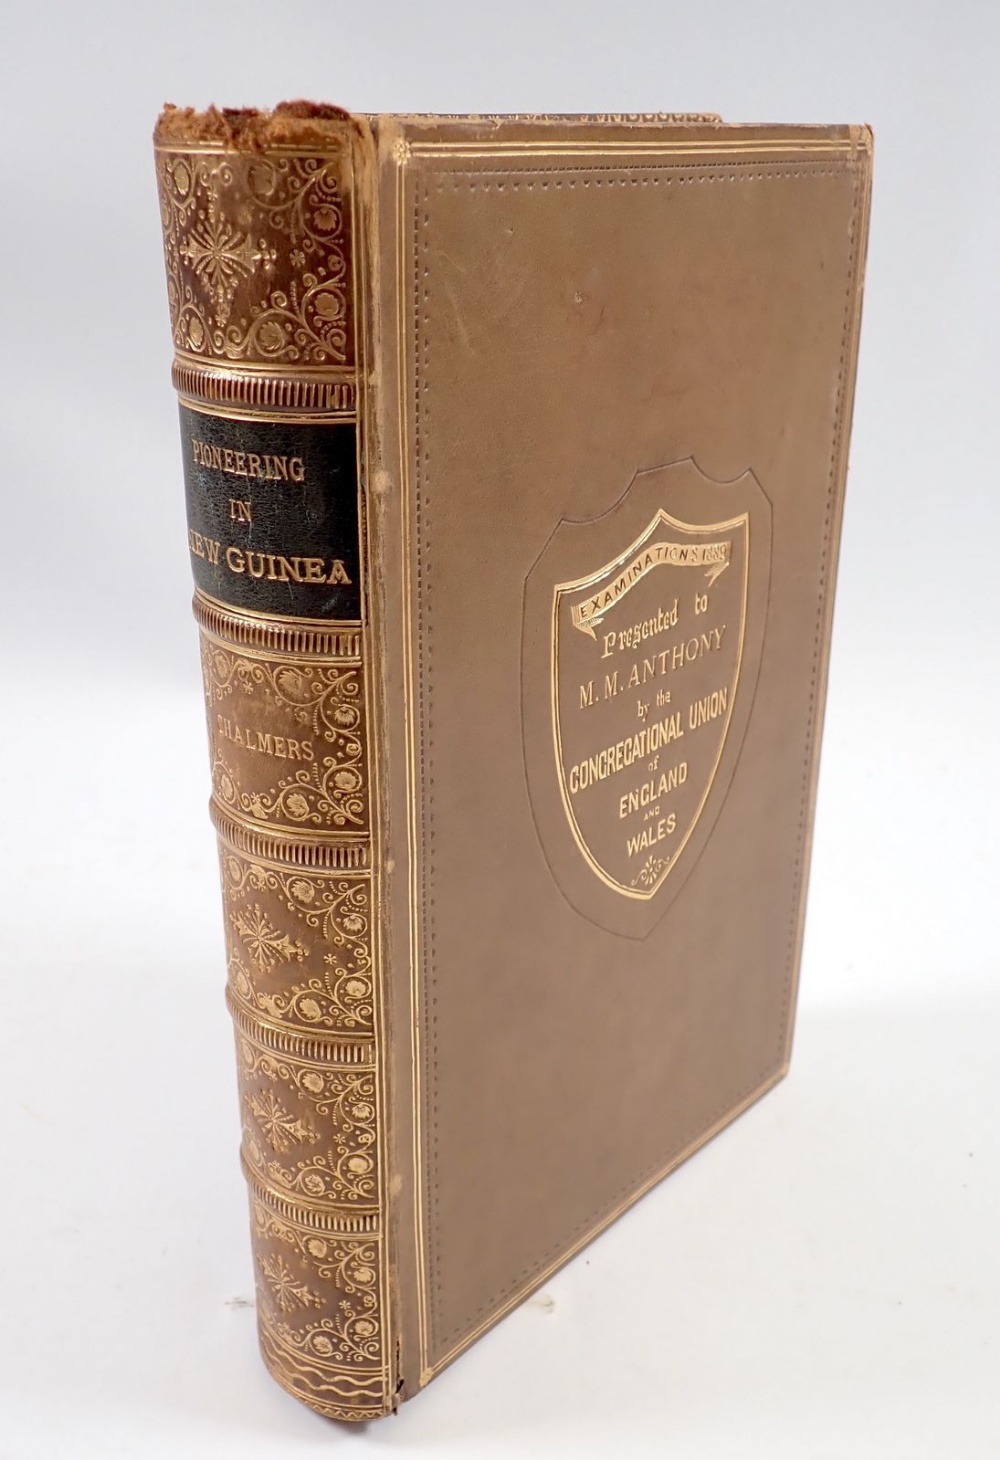 Pioneering in New Guinea by Charles Chalmers, 2nd Edition 1887